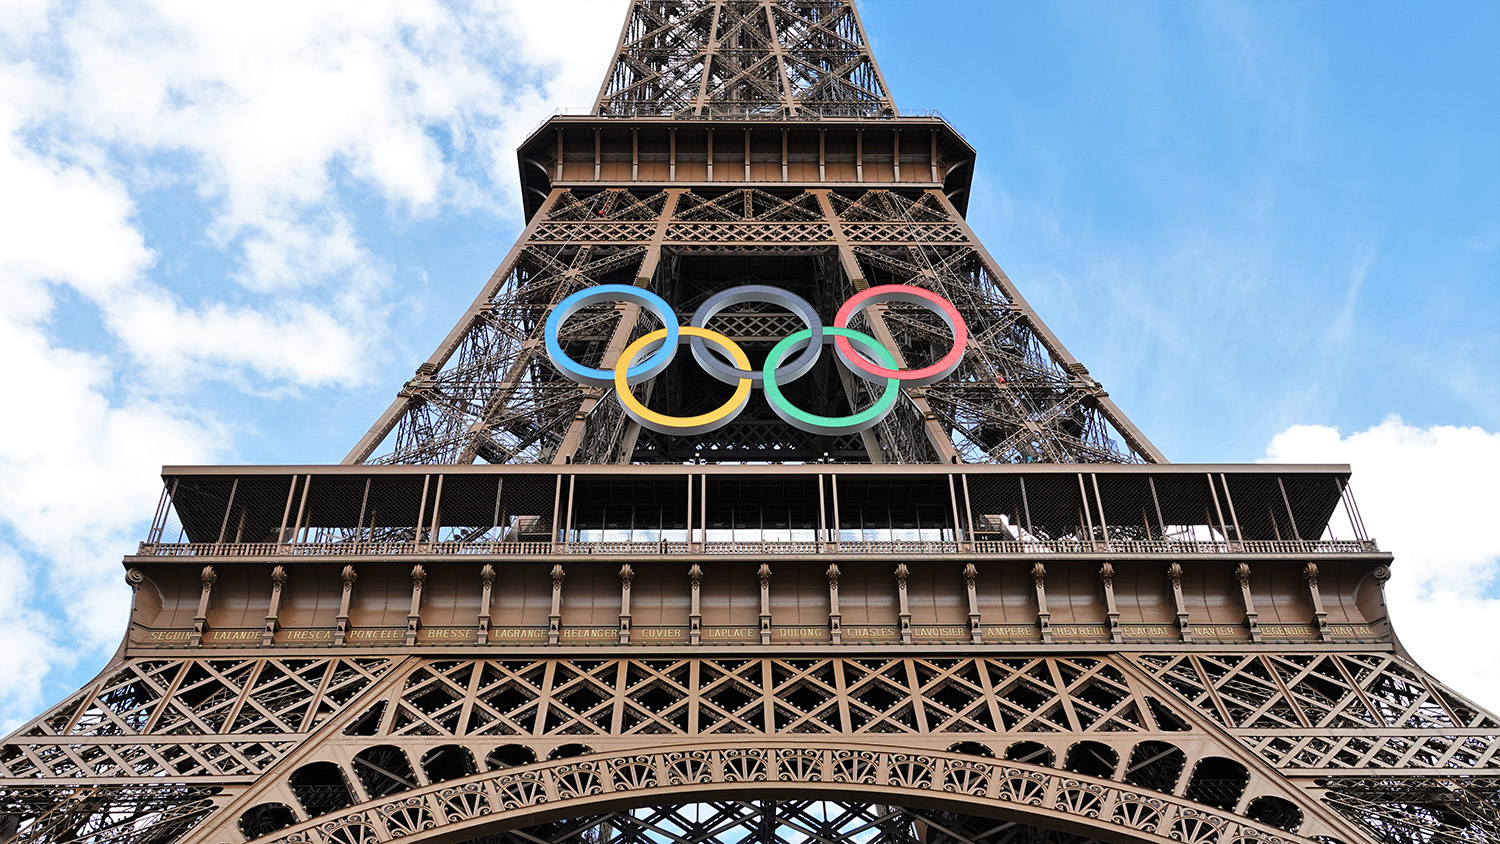 The Eiffel Tower with the logo of the Olympic Games.